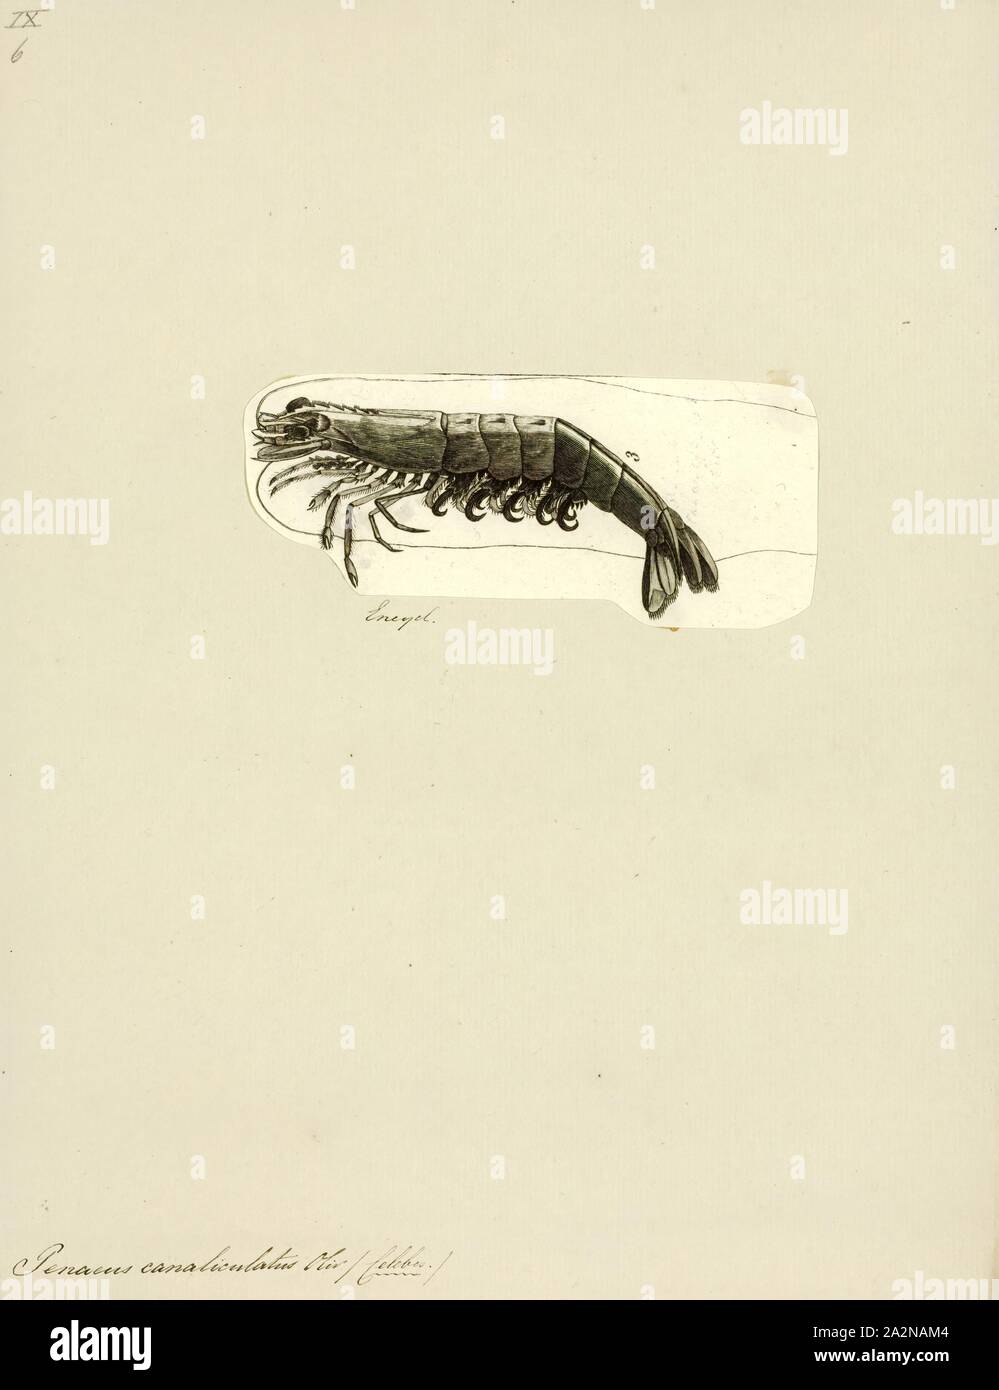 Penaeus canaliculatus, Print, Penaeus is a genus of Papus, including the  giant tiger prawn (P. monodon), the most important species of farmed  crustacean worldwide. The genus has been reorganised following a proposition